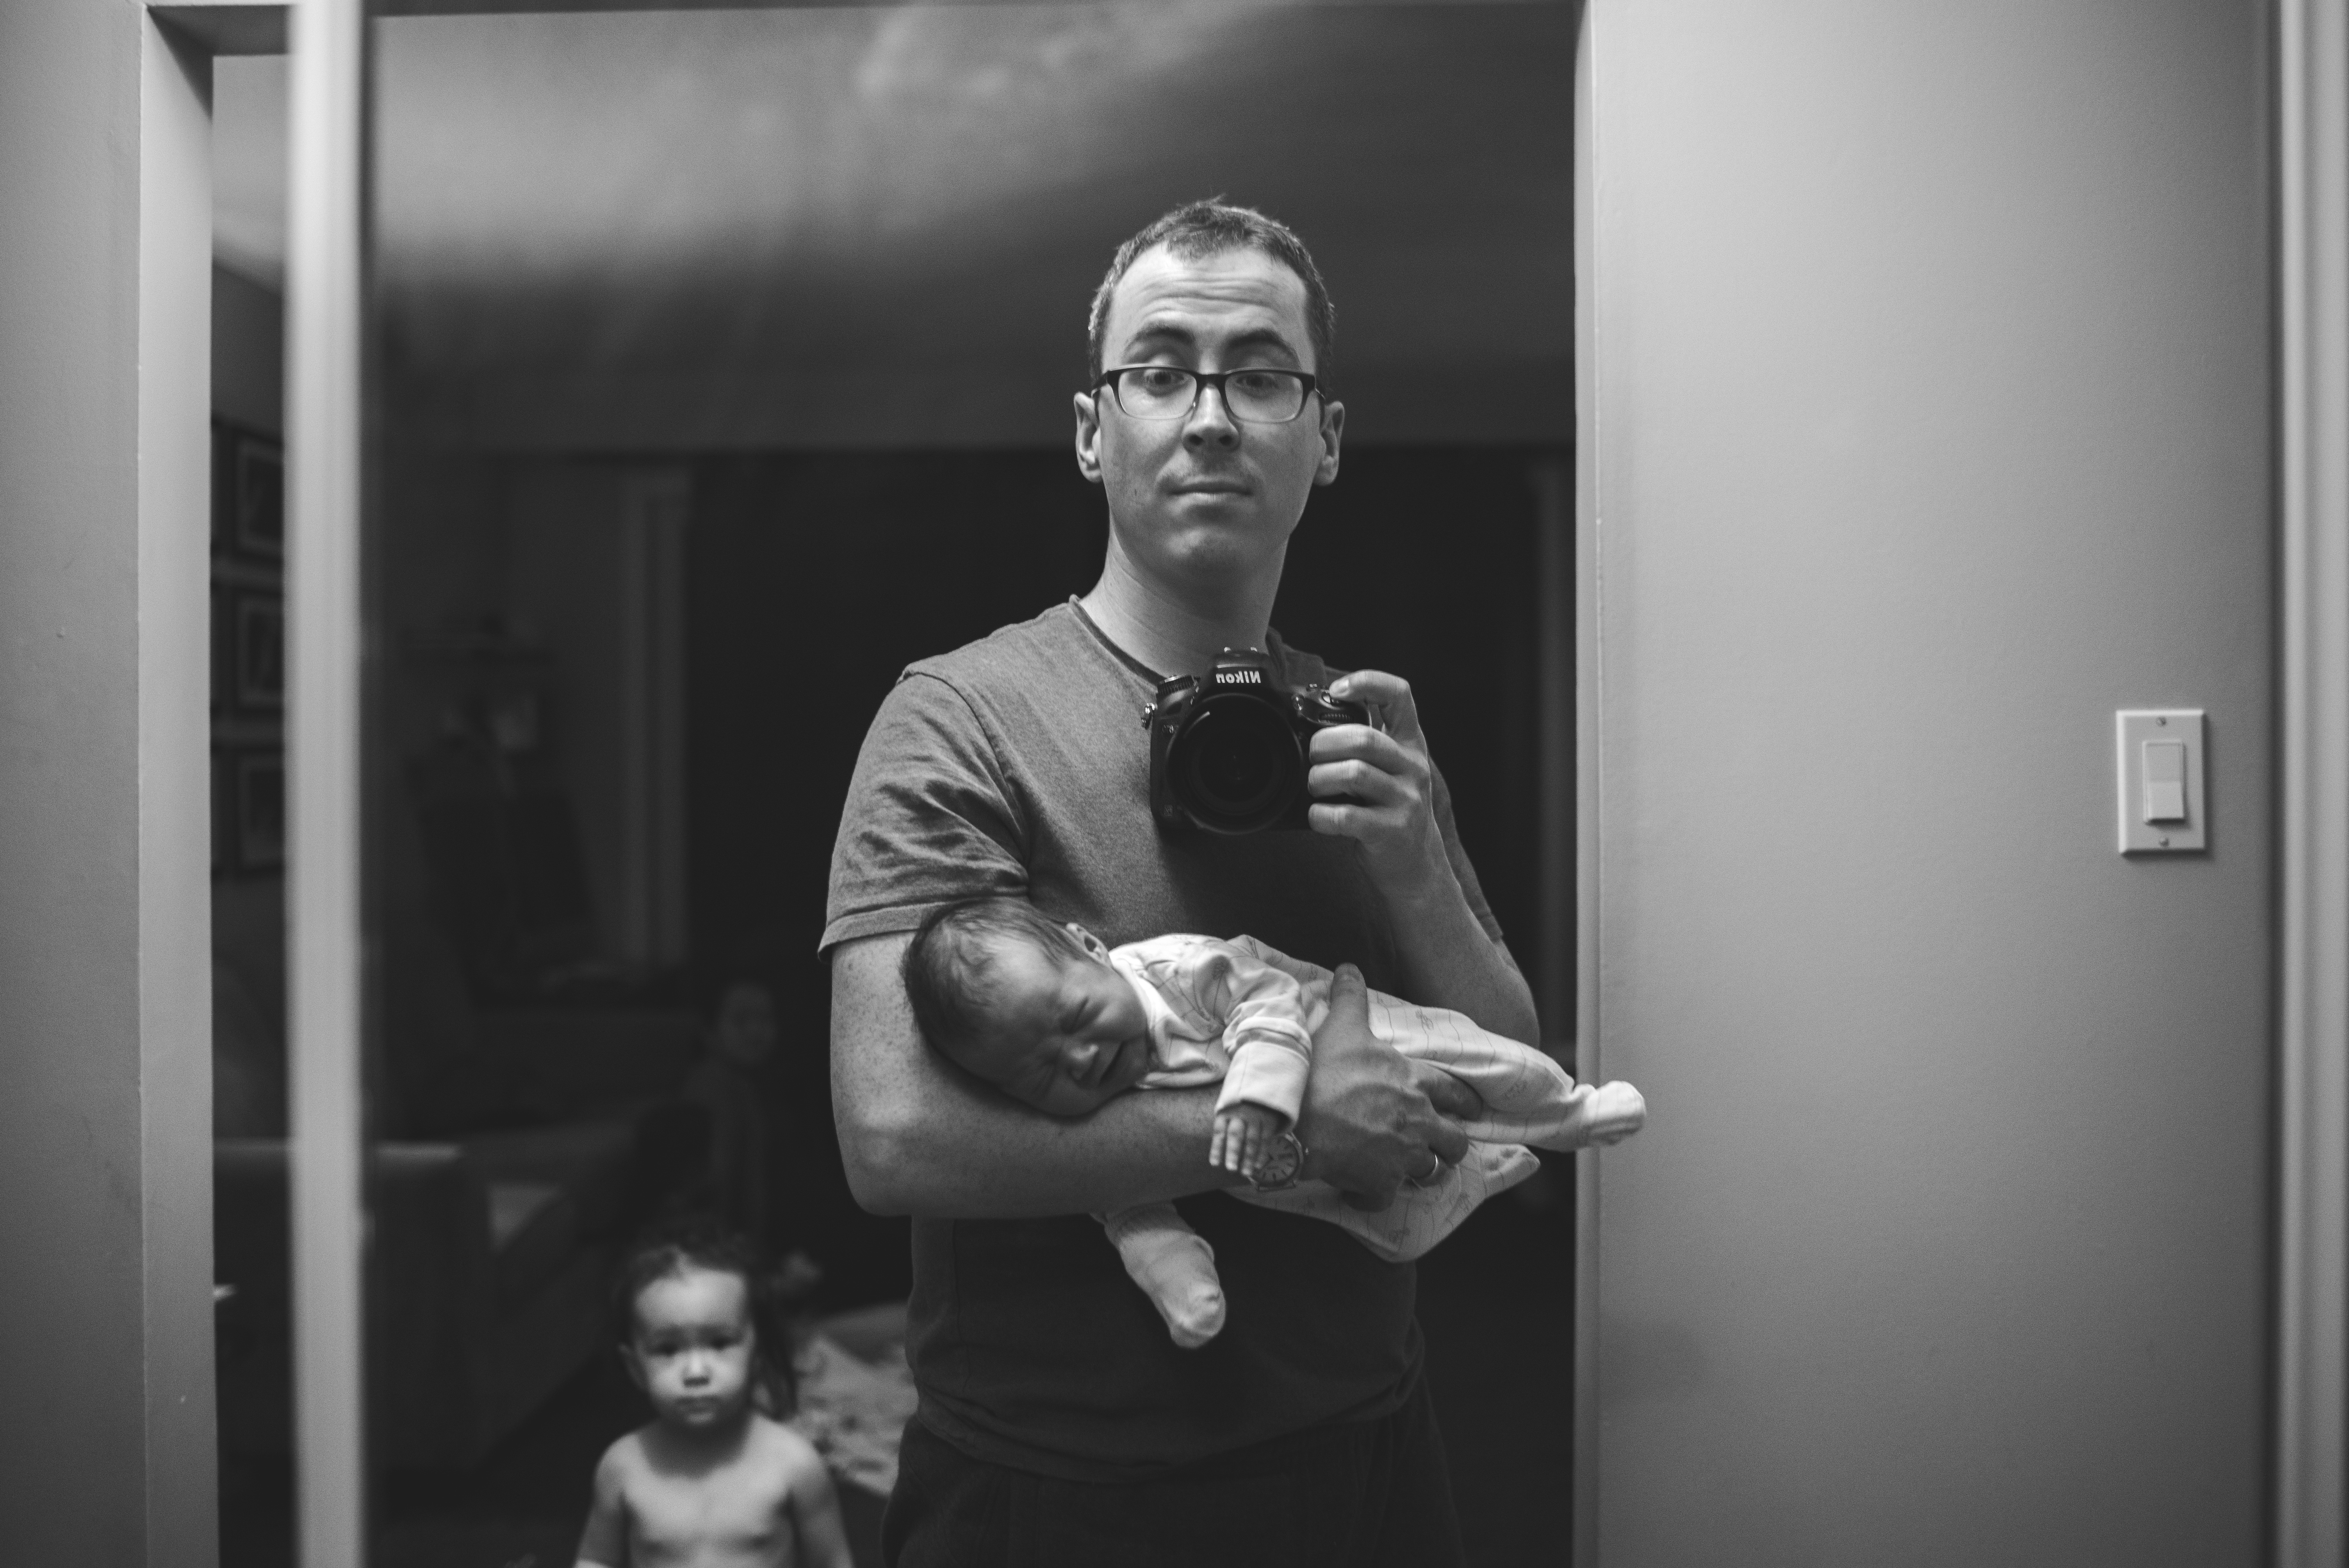 A father holding a crying infant.^[[Image](https://www.flickr.com/photos/david_martin_foto/23988232984/in/photostream/) by [David D](https://www.flickr.com/photos/david_martin_foto/) is licensed under [CC BY 2.0](https://creativecommons.org/licenses/by/2.0/)]